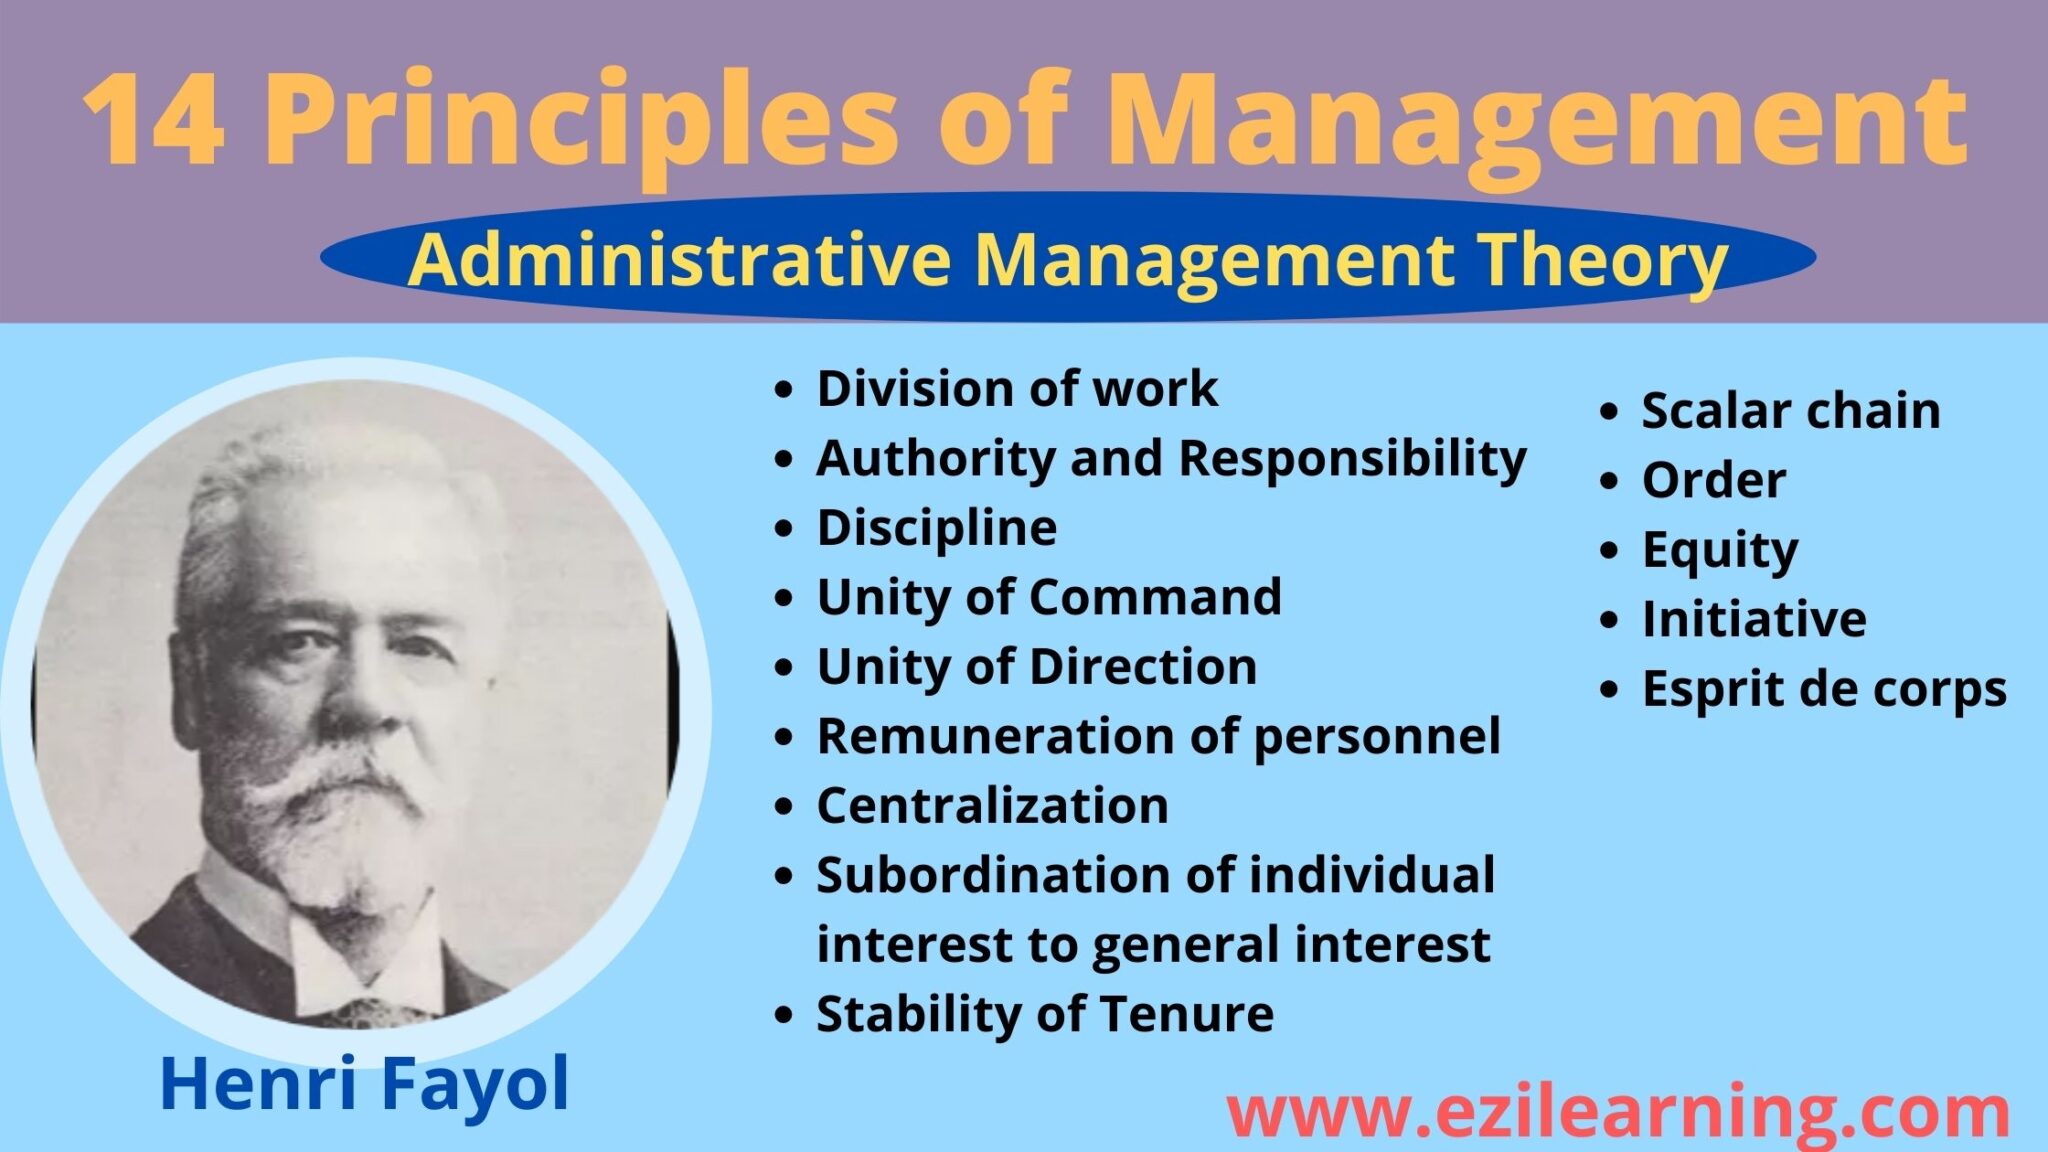 principles of management for assignment